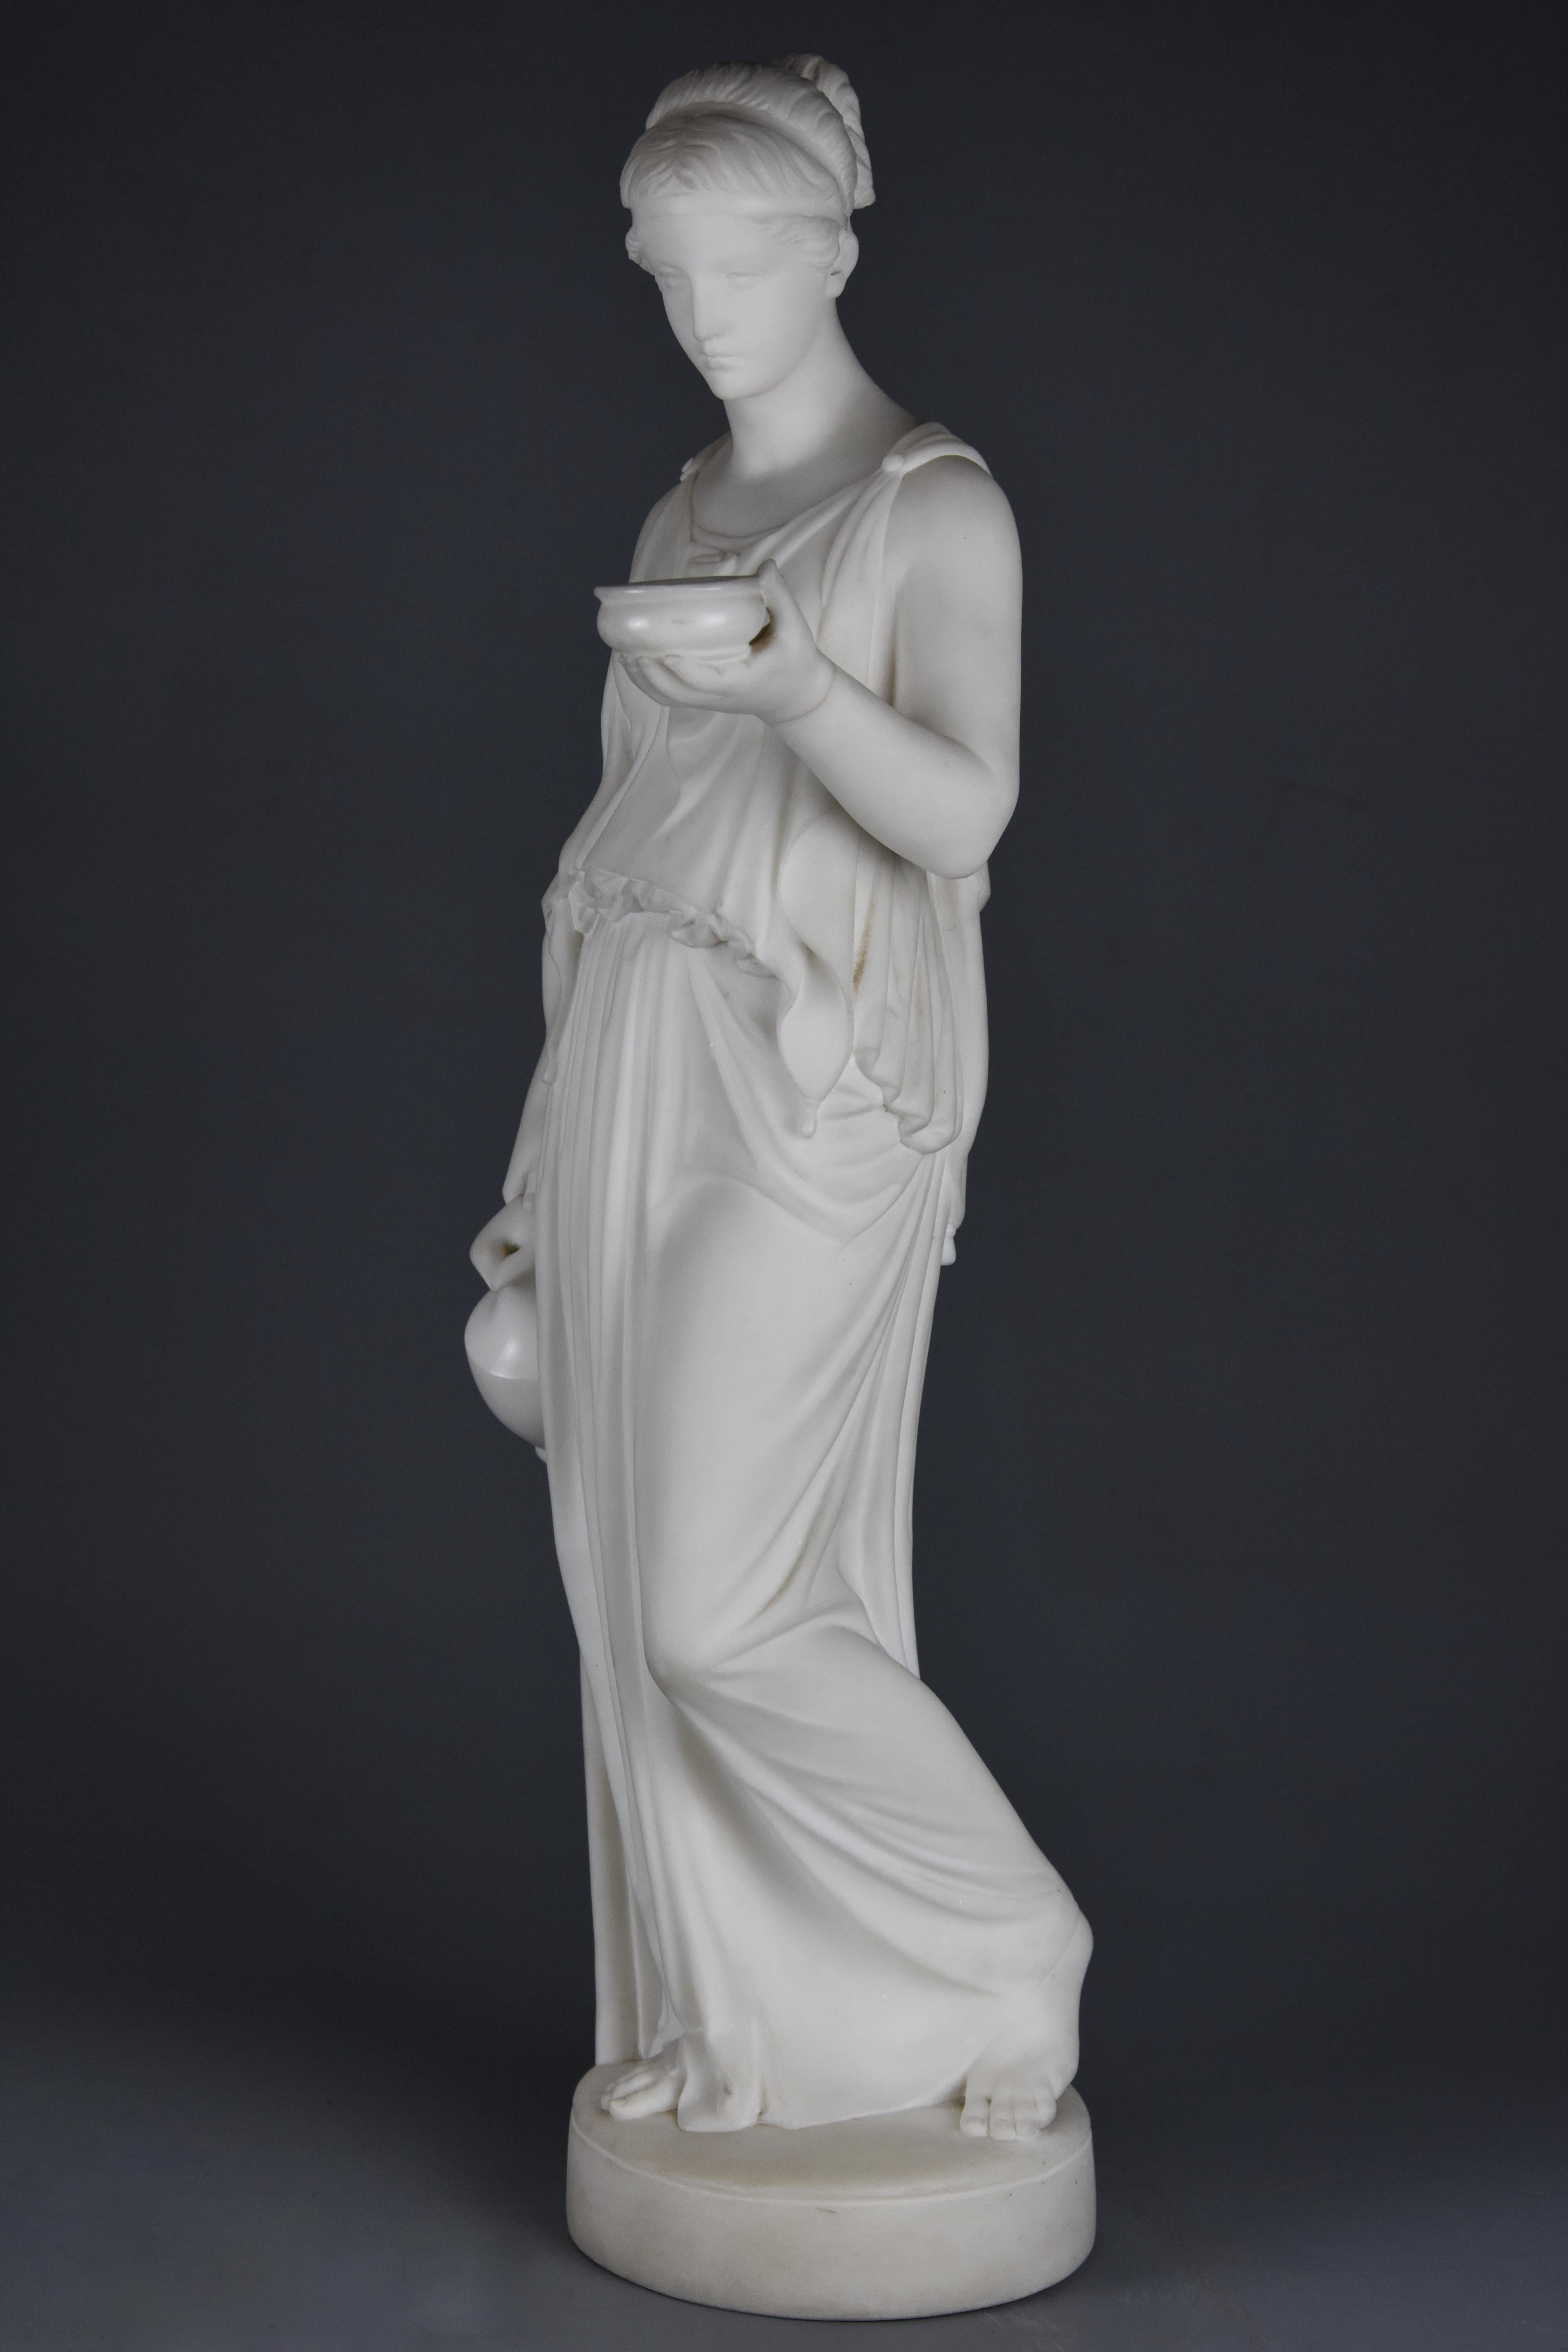 Italian Fine Quality Mid-19th Century Carved Marble Figure of Hebe, Goddess of Youth